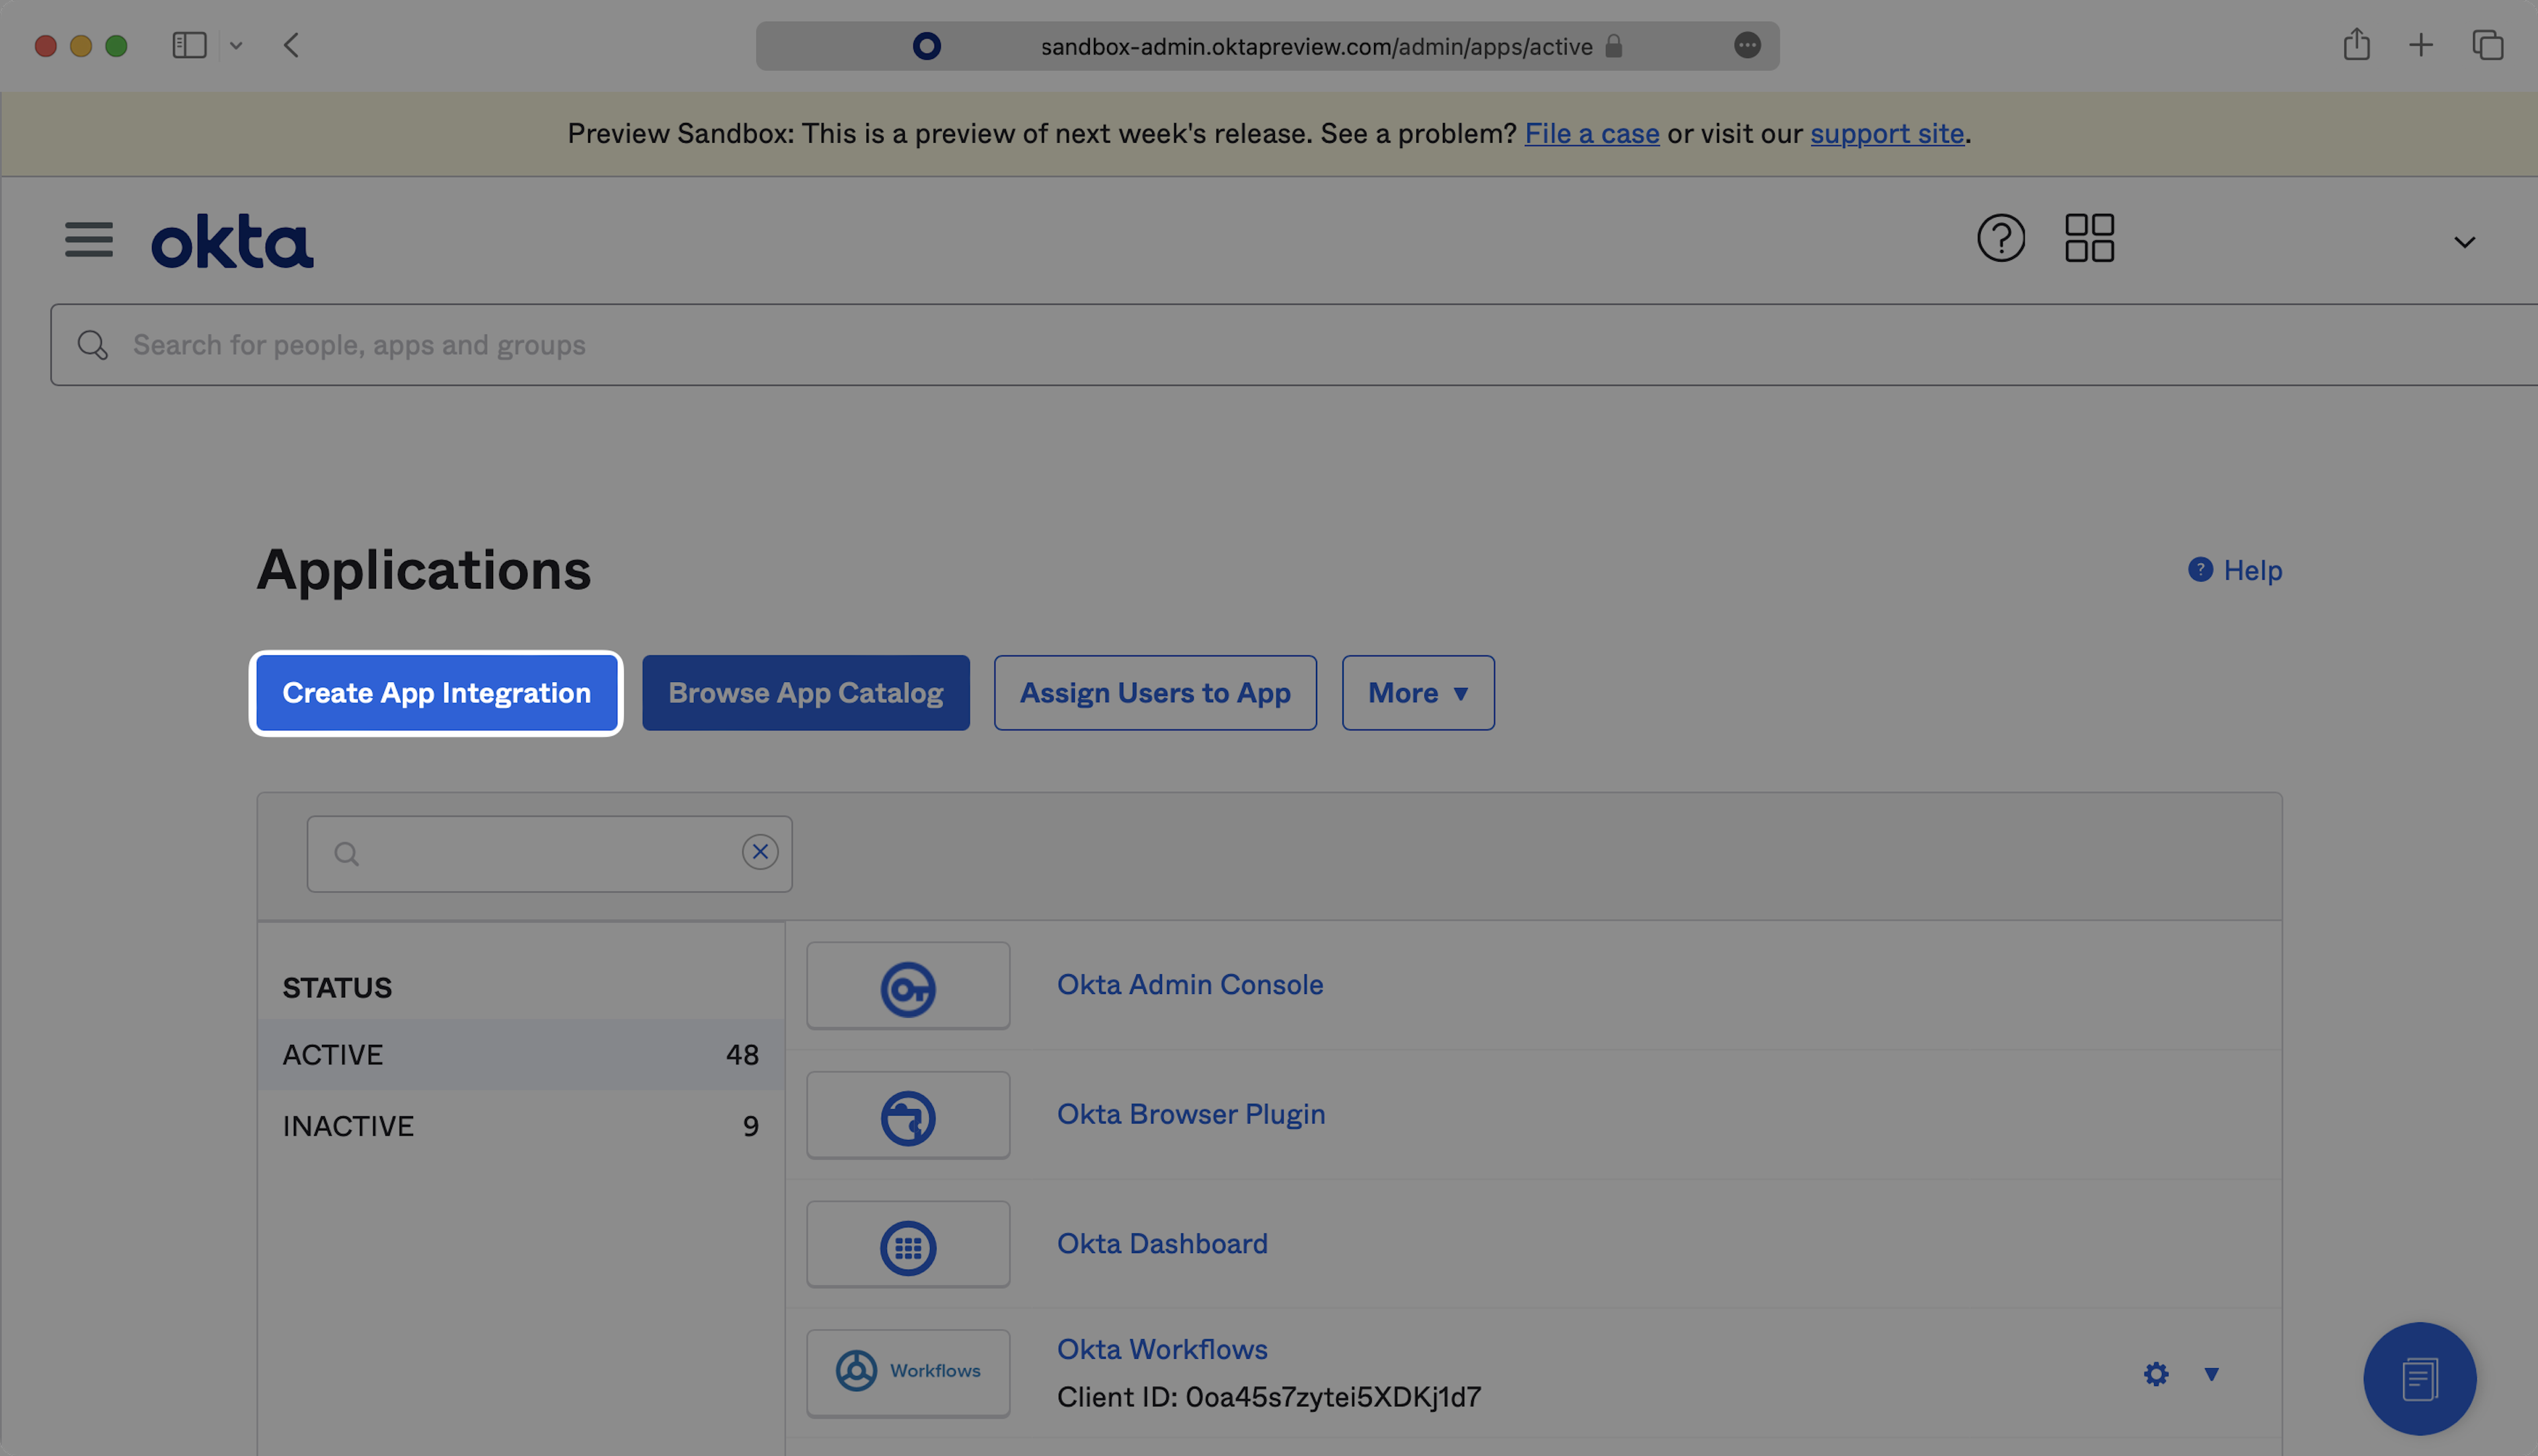 A screenshot showing where to select 'Create App Integration' in the Okta dashboard.